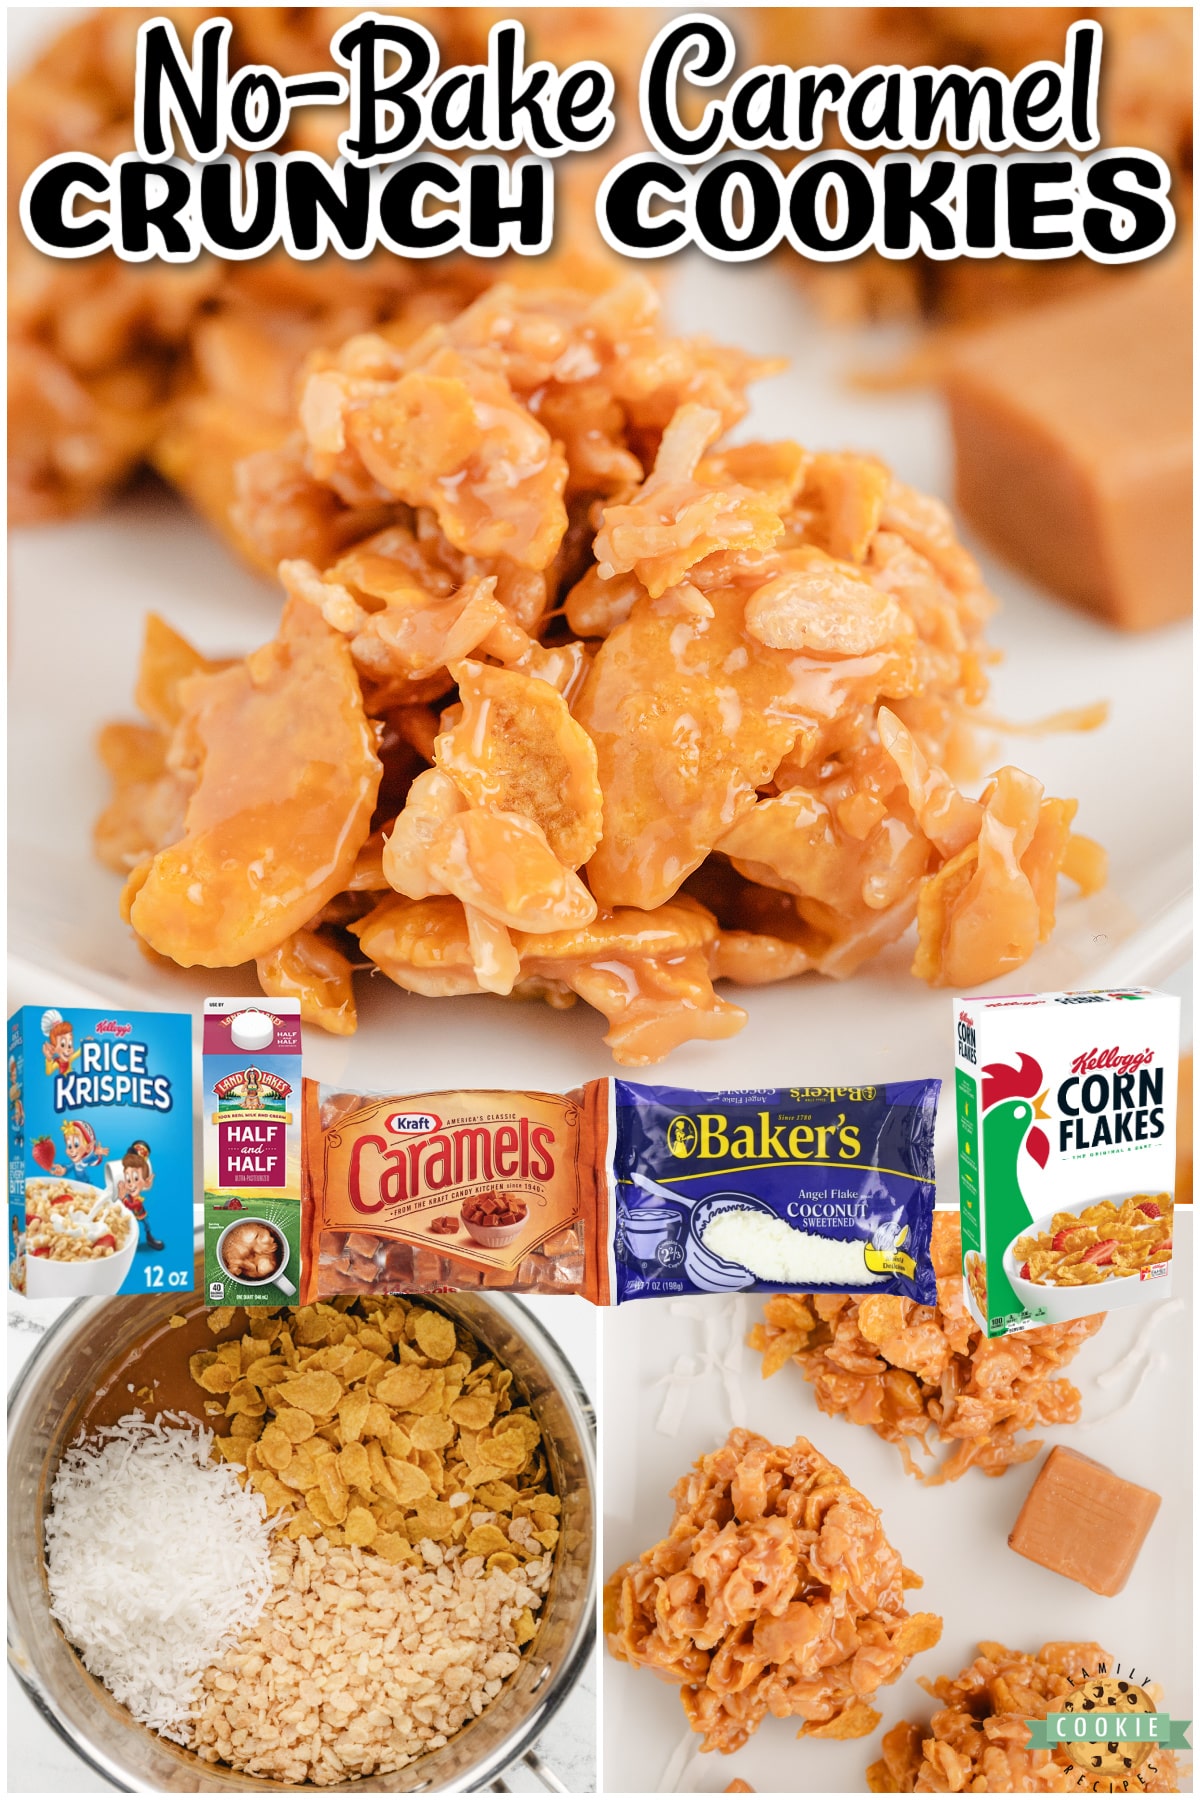 No-Bake Caramel Crunch Cookies combine cornflakes, rice krispies & coconut with soft caramel for a sweet & crunchy cookie that's made in minutes!